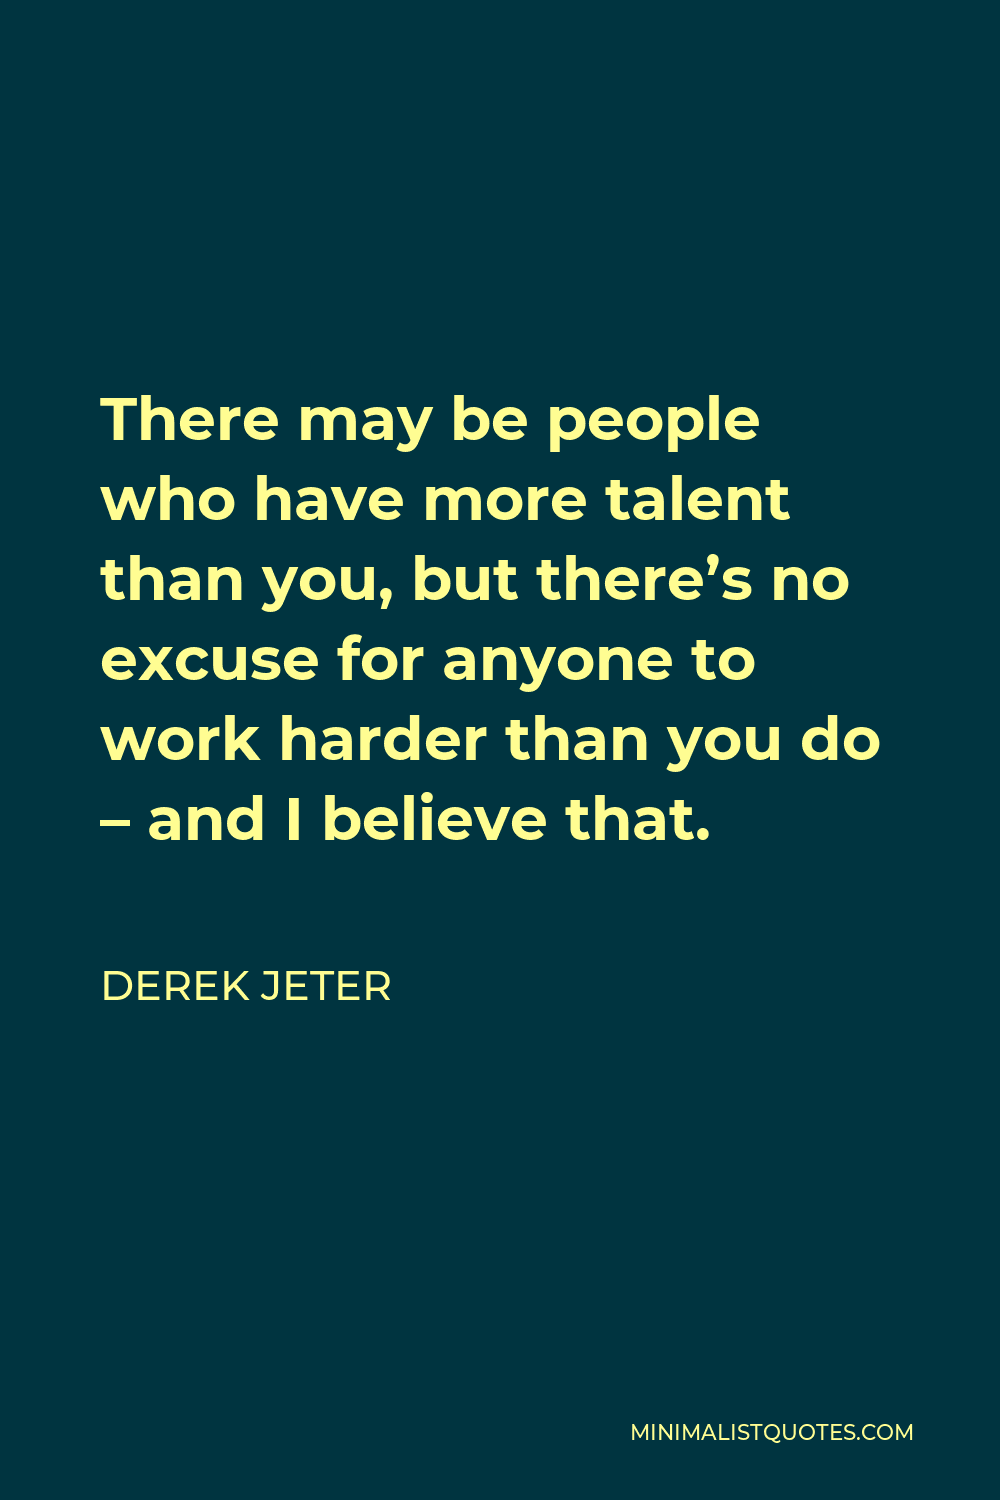 Derek Jeter Quote - There may be people who have more talent than you, but there’s no excuse for anyone to work harder than you do – and I believe that.